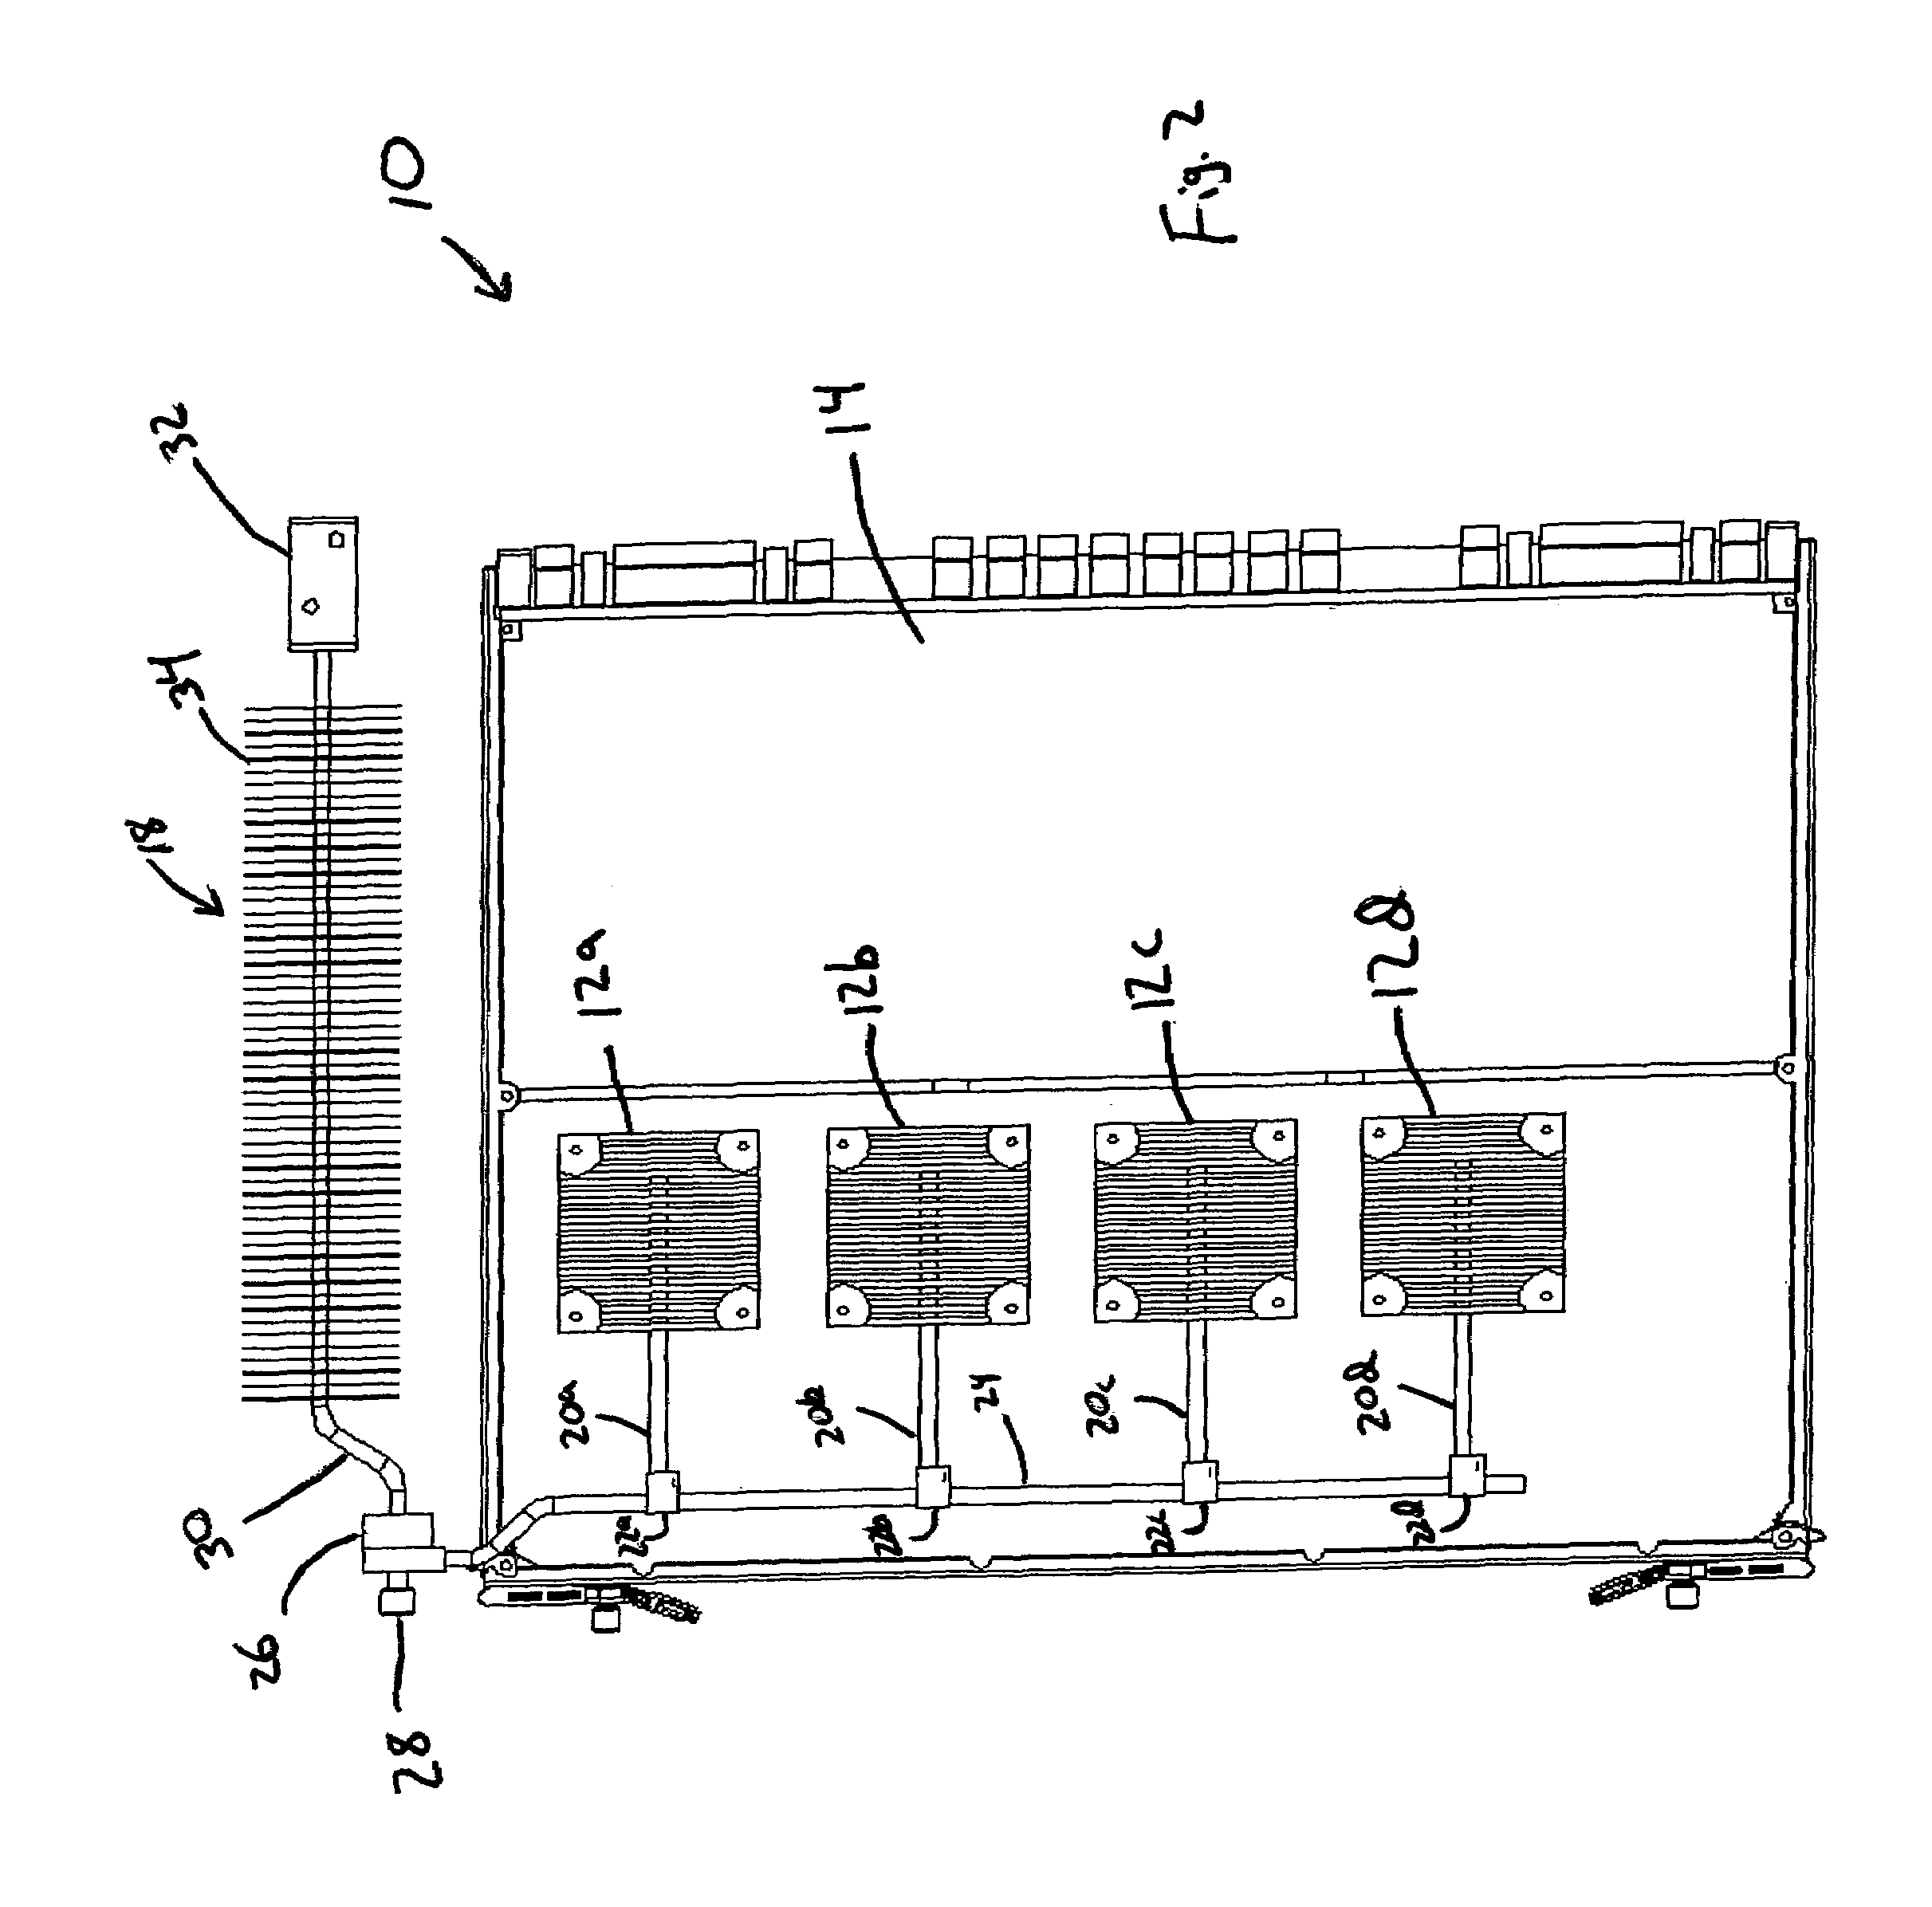 Method and apparatus for dispersing heat from high-power electronic devices